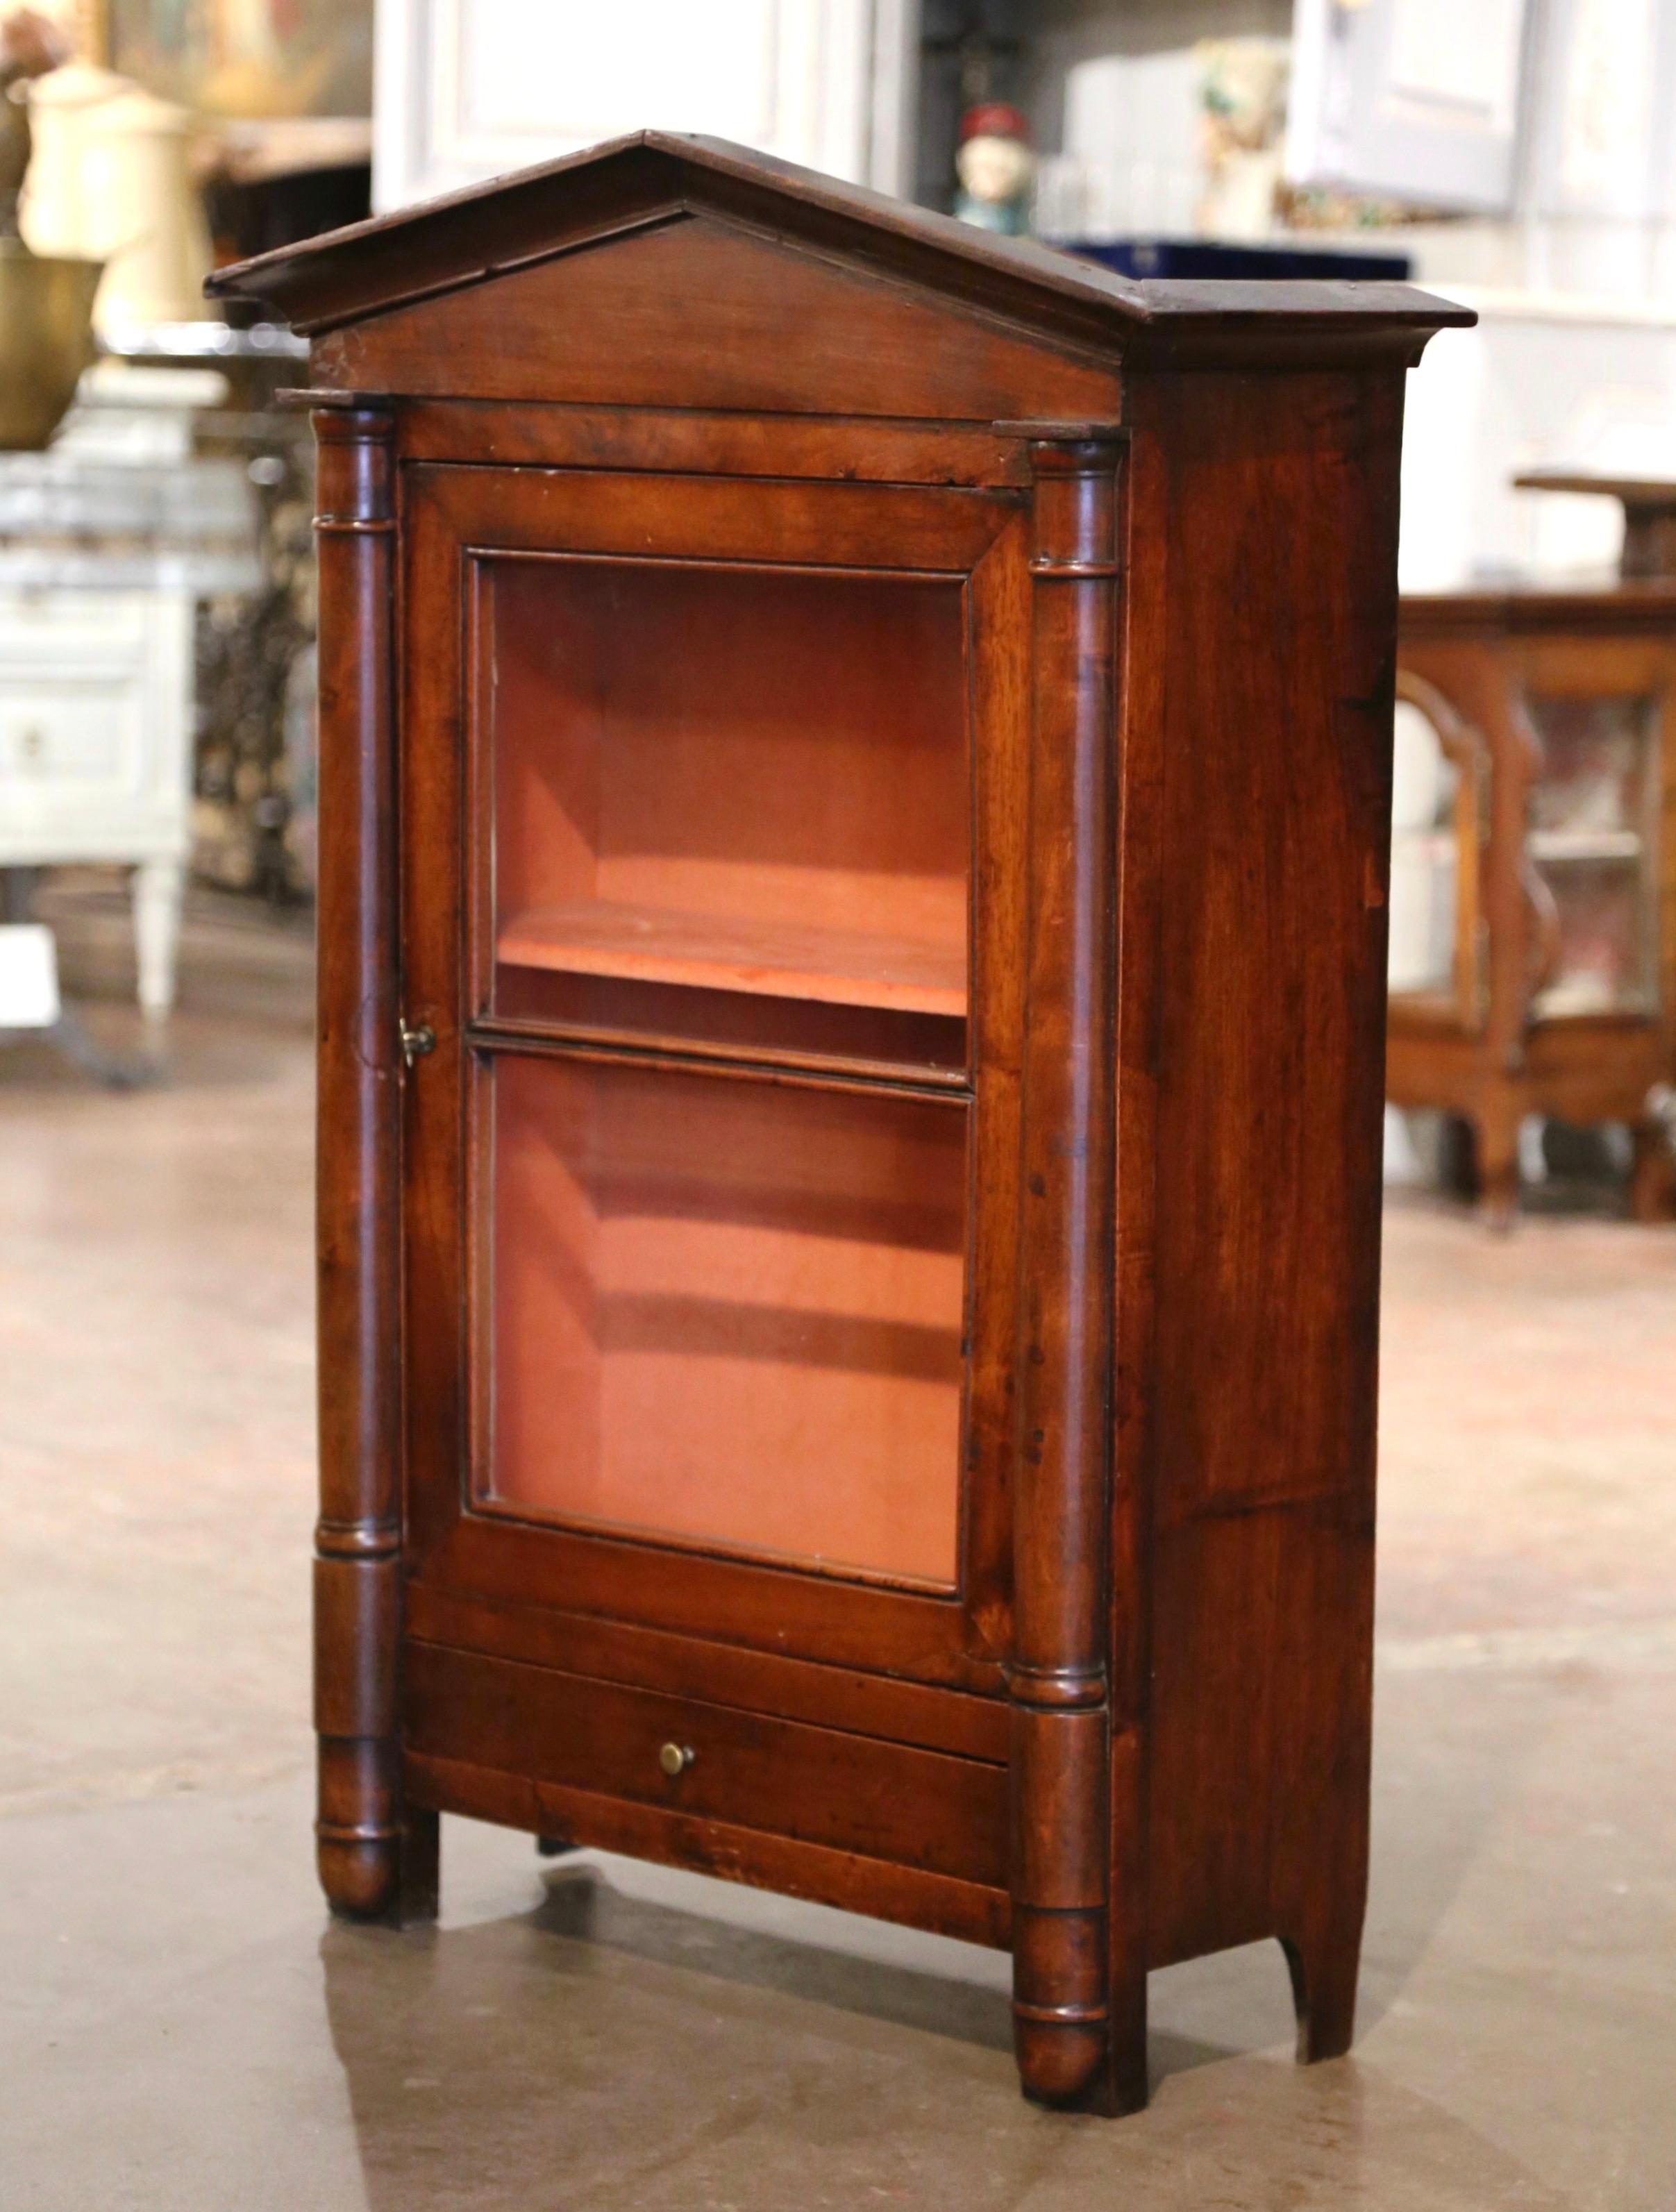 This elegant antique vitrine was crafted in southern France, circa 1830. The wall cabinet with roof shape bonnet top, is decorated with baluster columns on the sides. The curio cabinet features a single door with the original wavy glass panel and